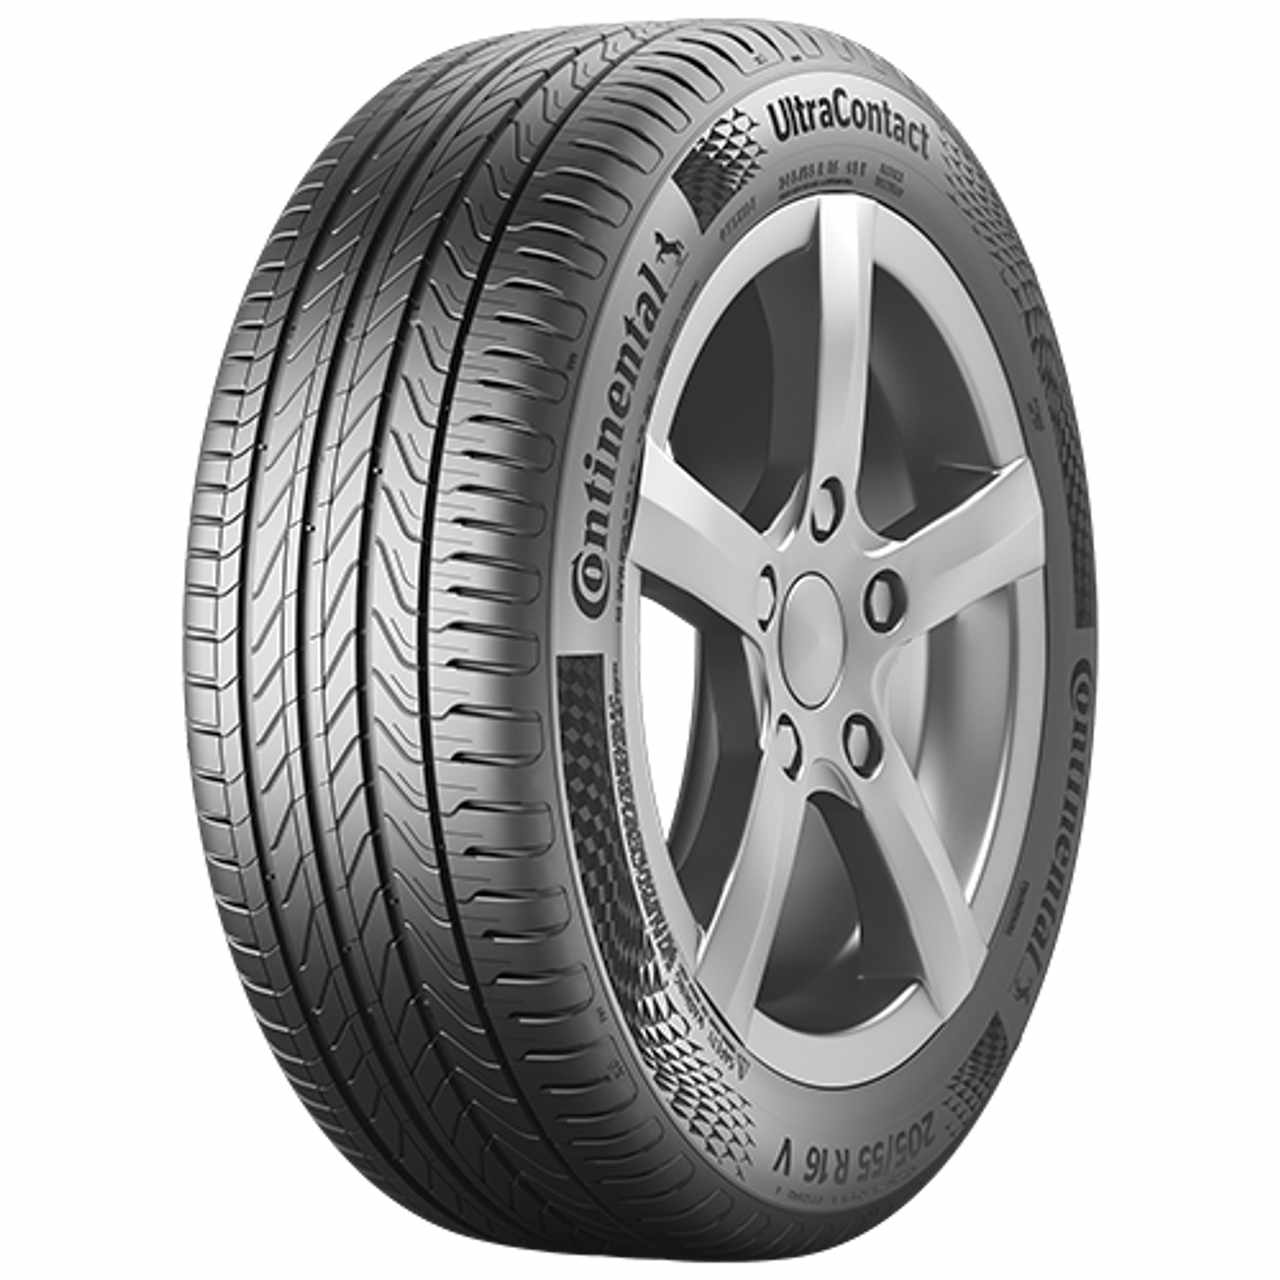 CONTINENTAL ULTRACONTACT (EVc) 195/50R16 84V FR BSW